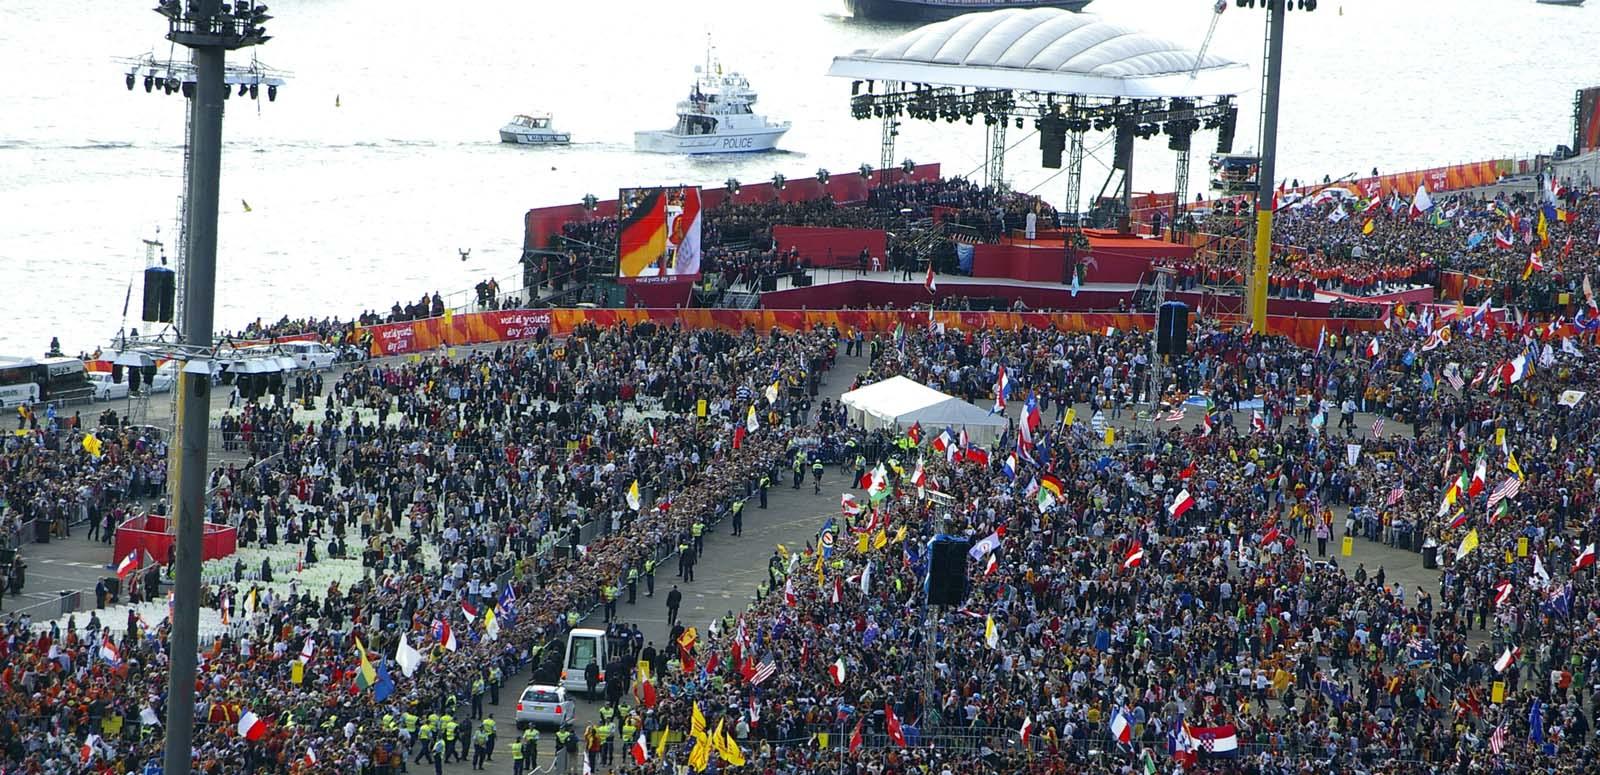 A large crowd of people at World Youth Day at Barangaroo, Sydney in July 2008.